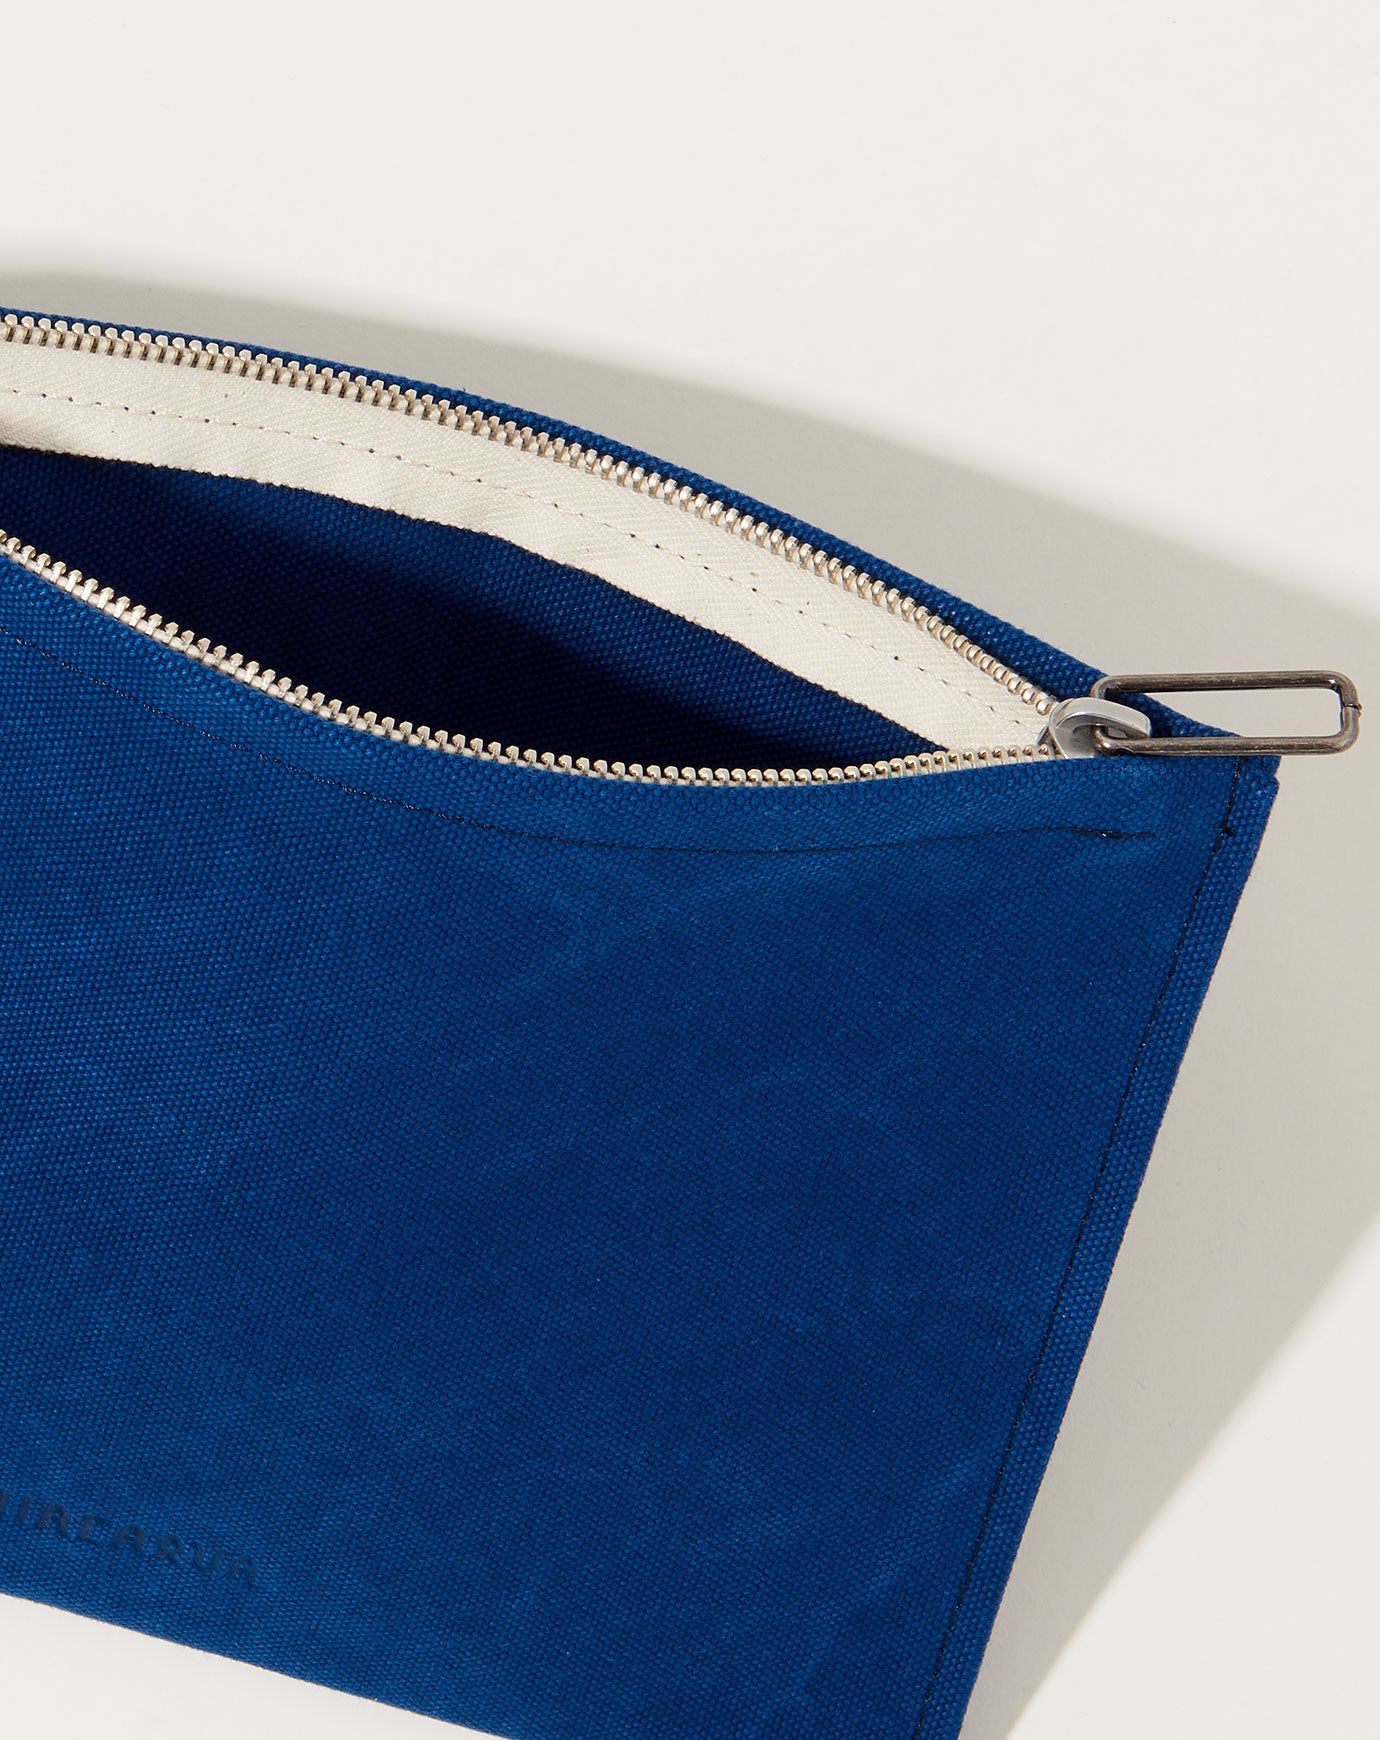 Amiacalva Washed Canvas Pouch in Blue